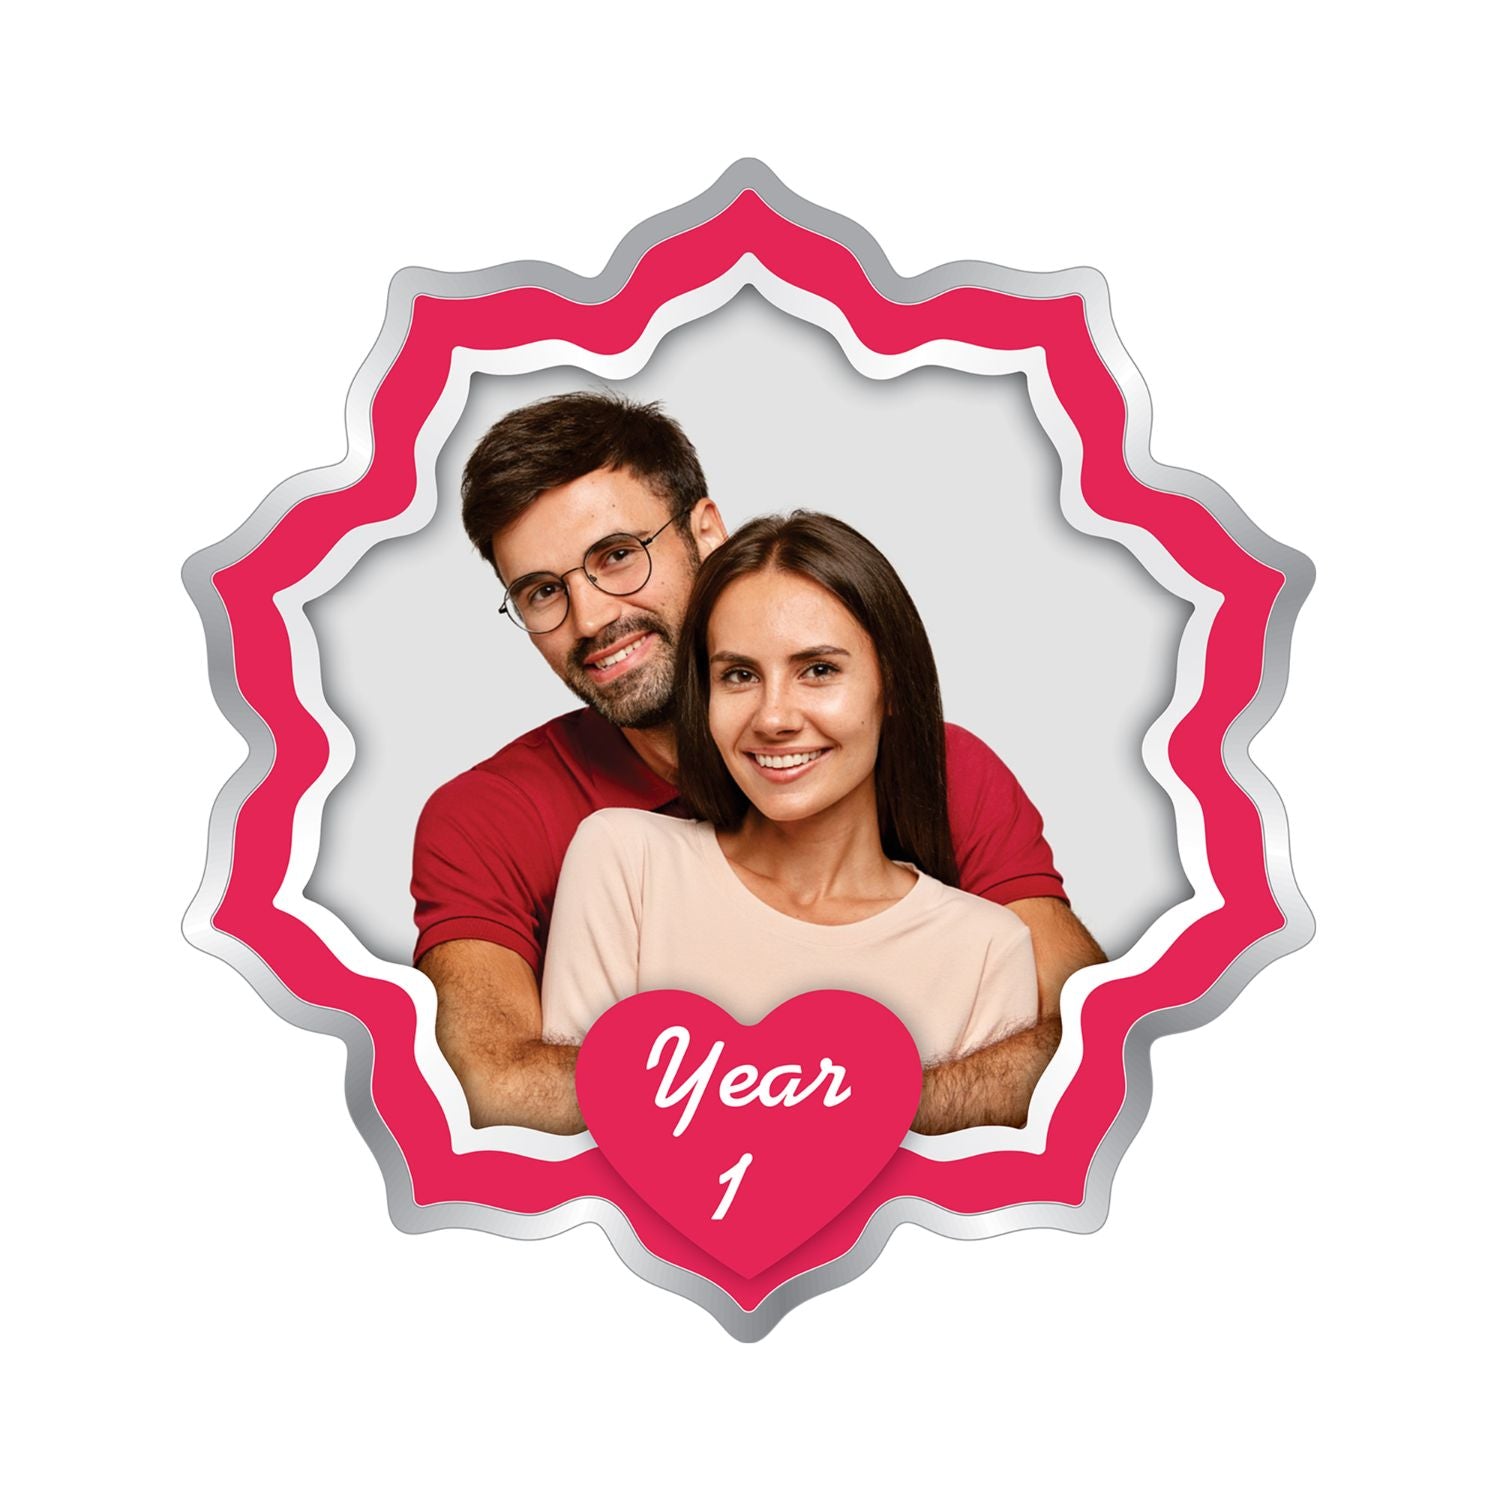 BIS Hallmarked Personalised Silver Coin Wedding Anniversary Gift for Couple Flower Shape 999 Pure